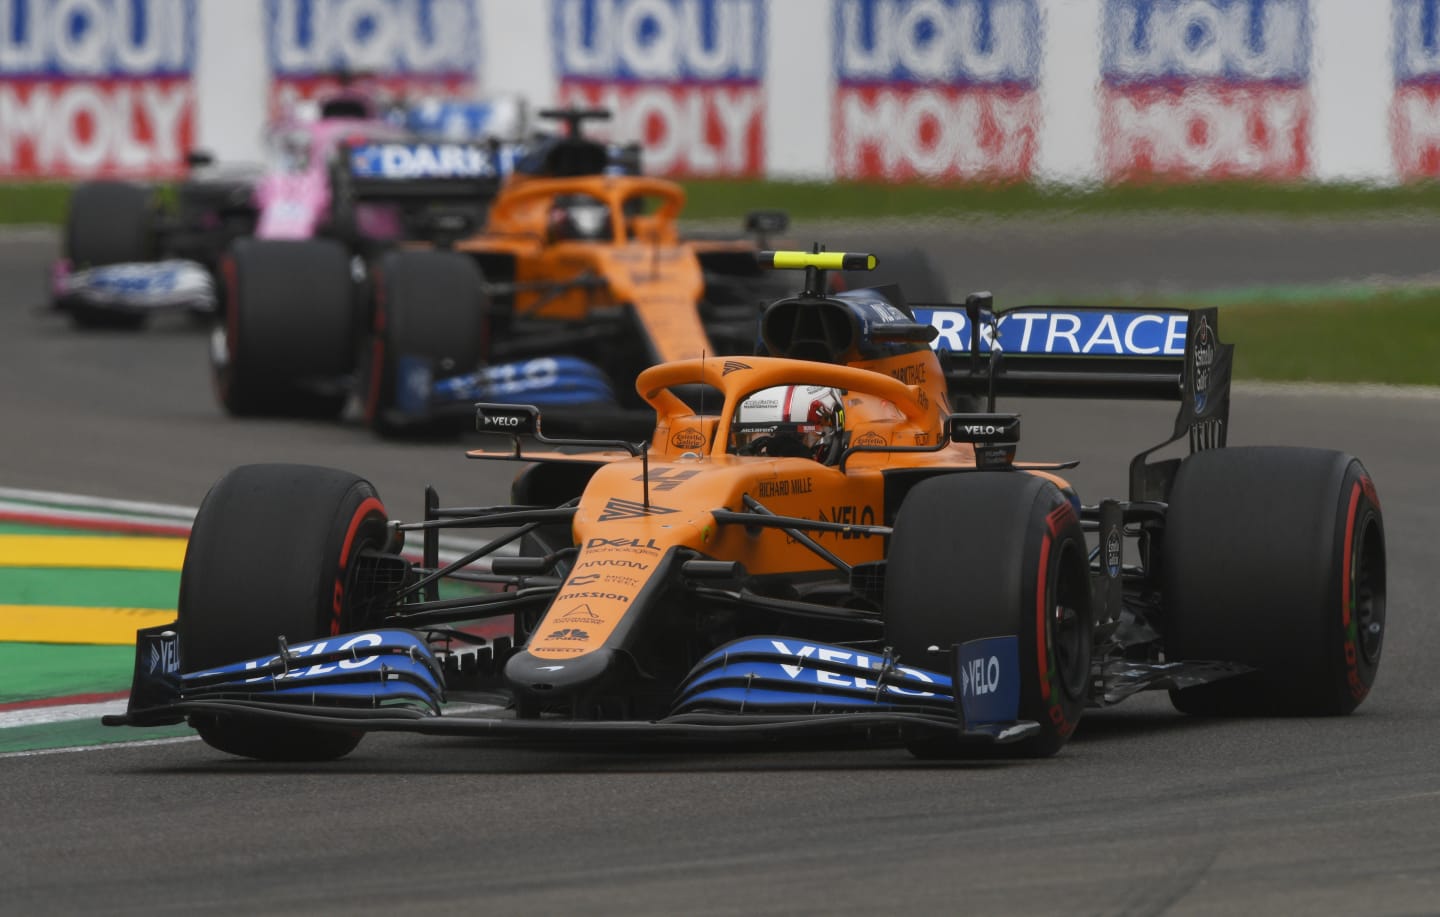 IMOLA, ITALY - NOVEMBER 01: Lando Norris of Great Britain driving the (4) McLaren F1 Team MCL35 Renault on track during the F1 Grand Prix of Emilia Romagna at Autodromo Enzo e Dino Ferrari on November 01, 2020 in Imola, Italy. (Photo by Rudy Carezzevoli/Getty Images)